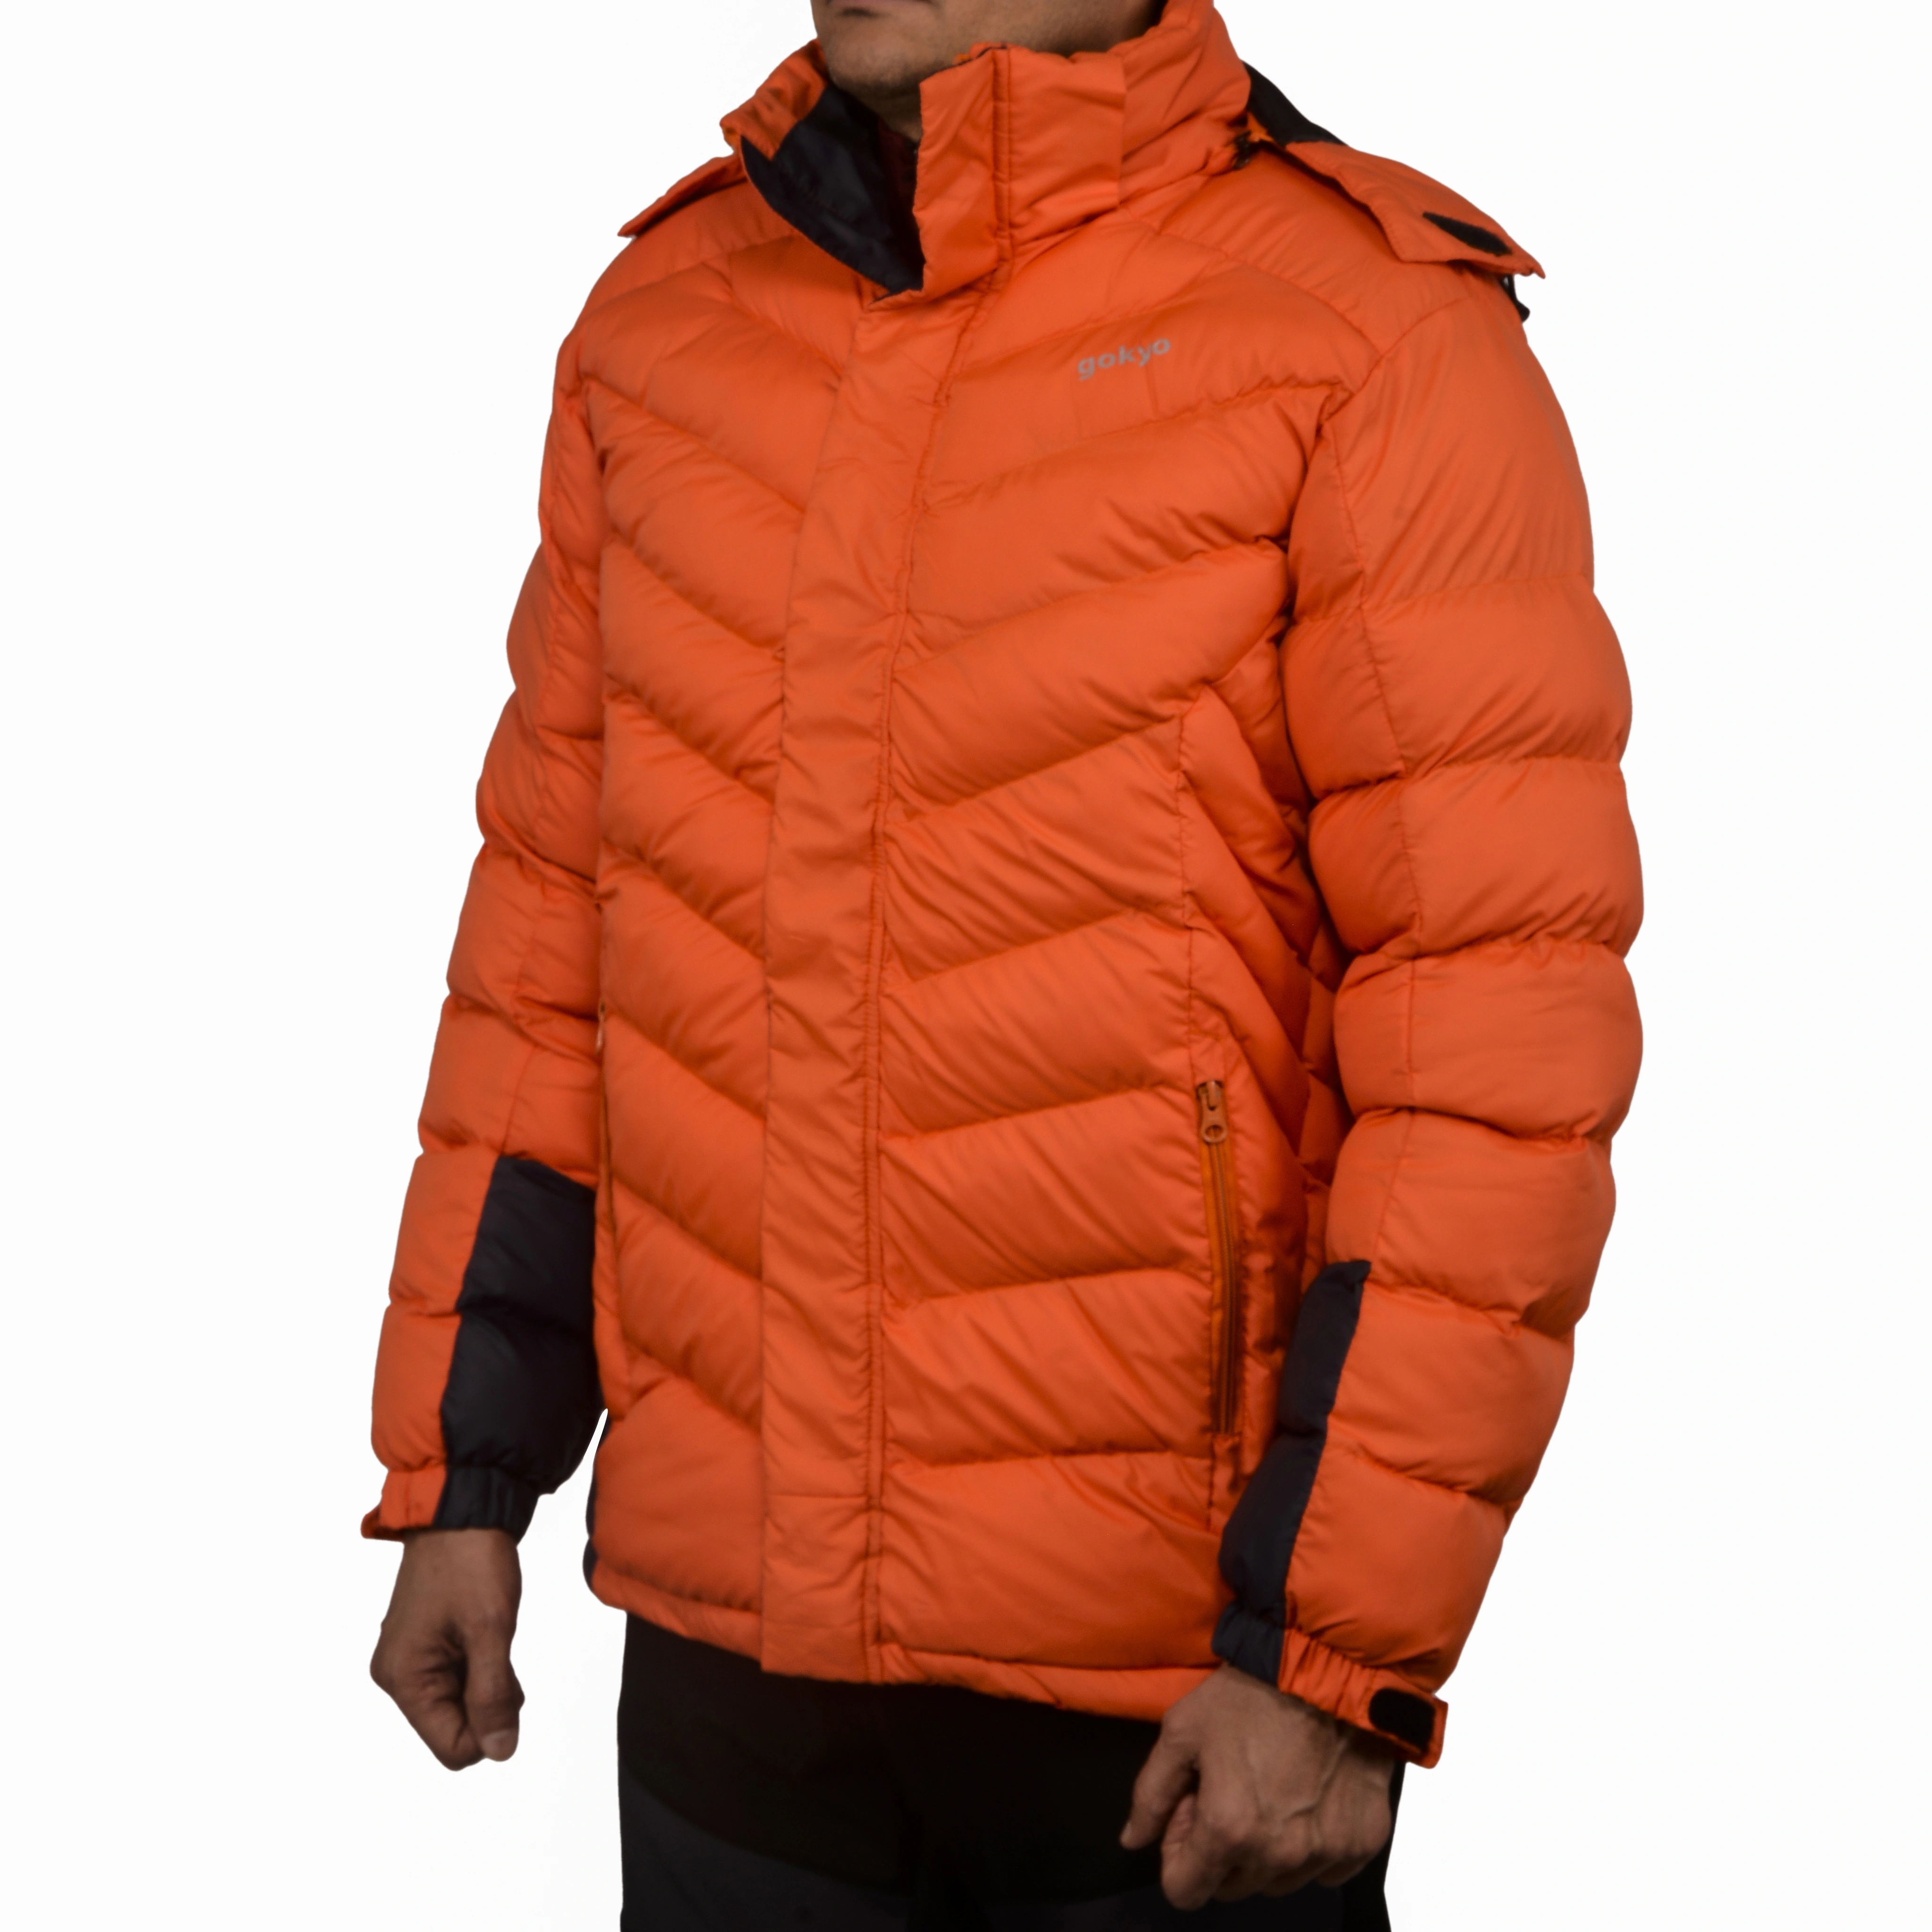 K2 Survivor Down Jacket for Men: Stylized Functionality for Extreme Cold Weather Expeditions (Up to -20°C)-4XL-Orange-2